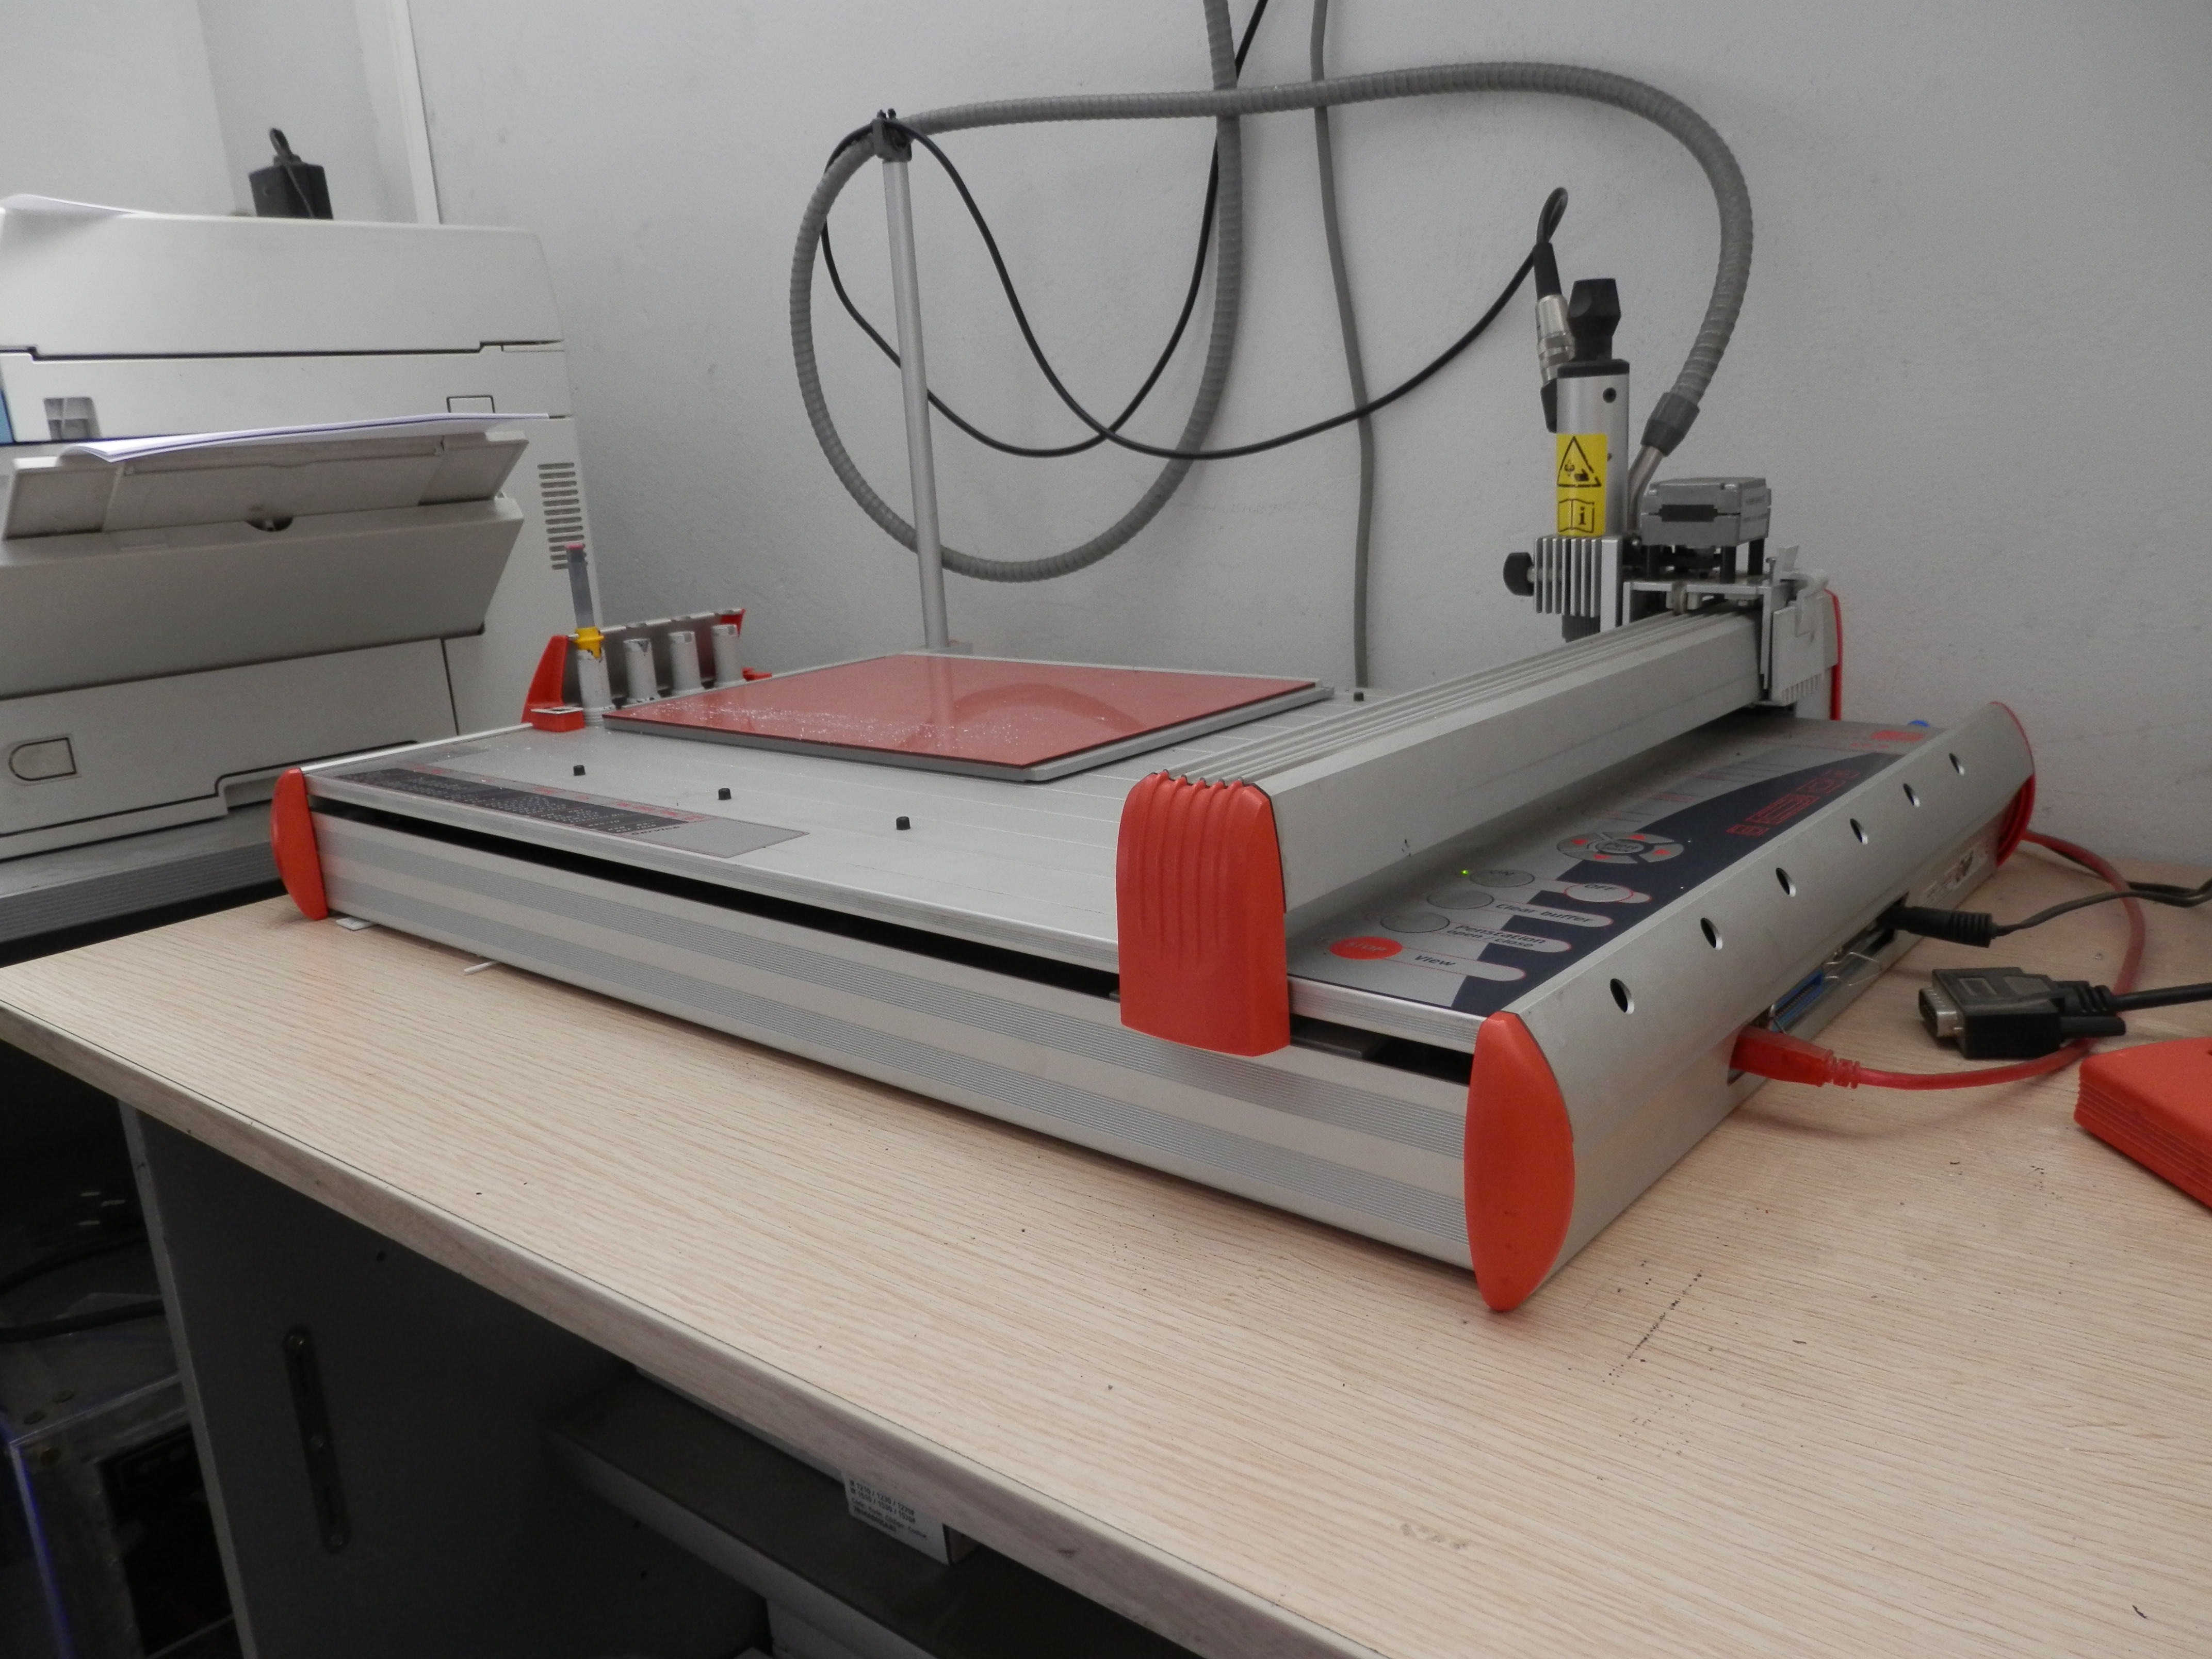 New multifunction plotter for labeling and marking.